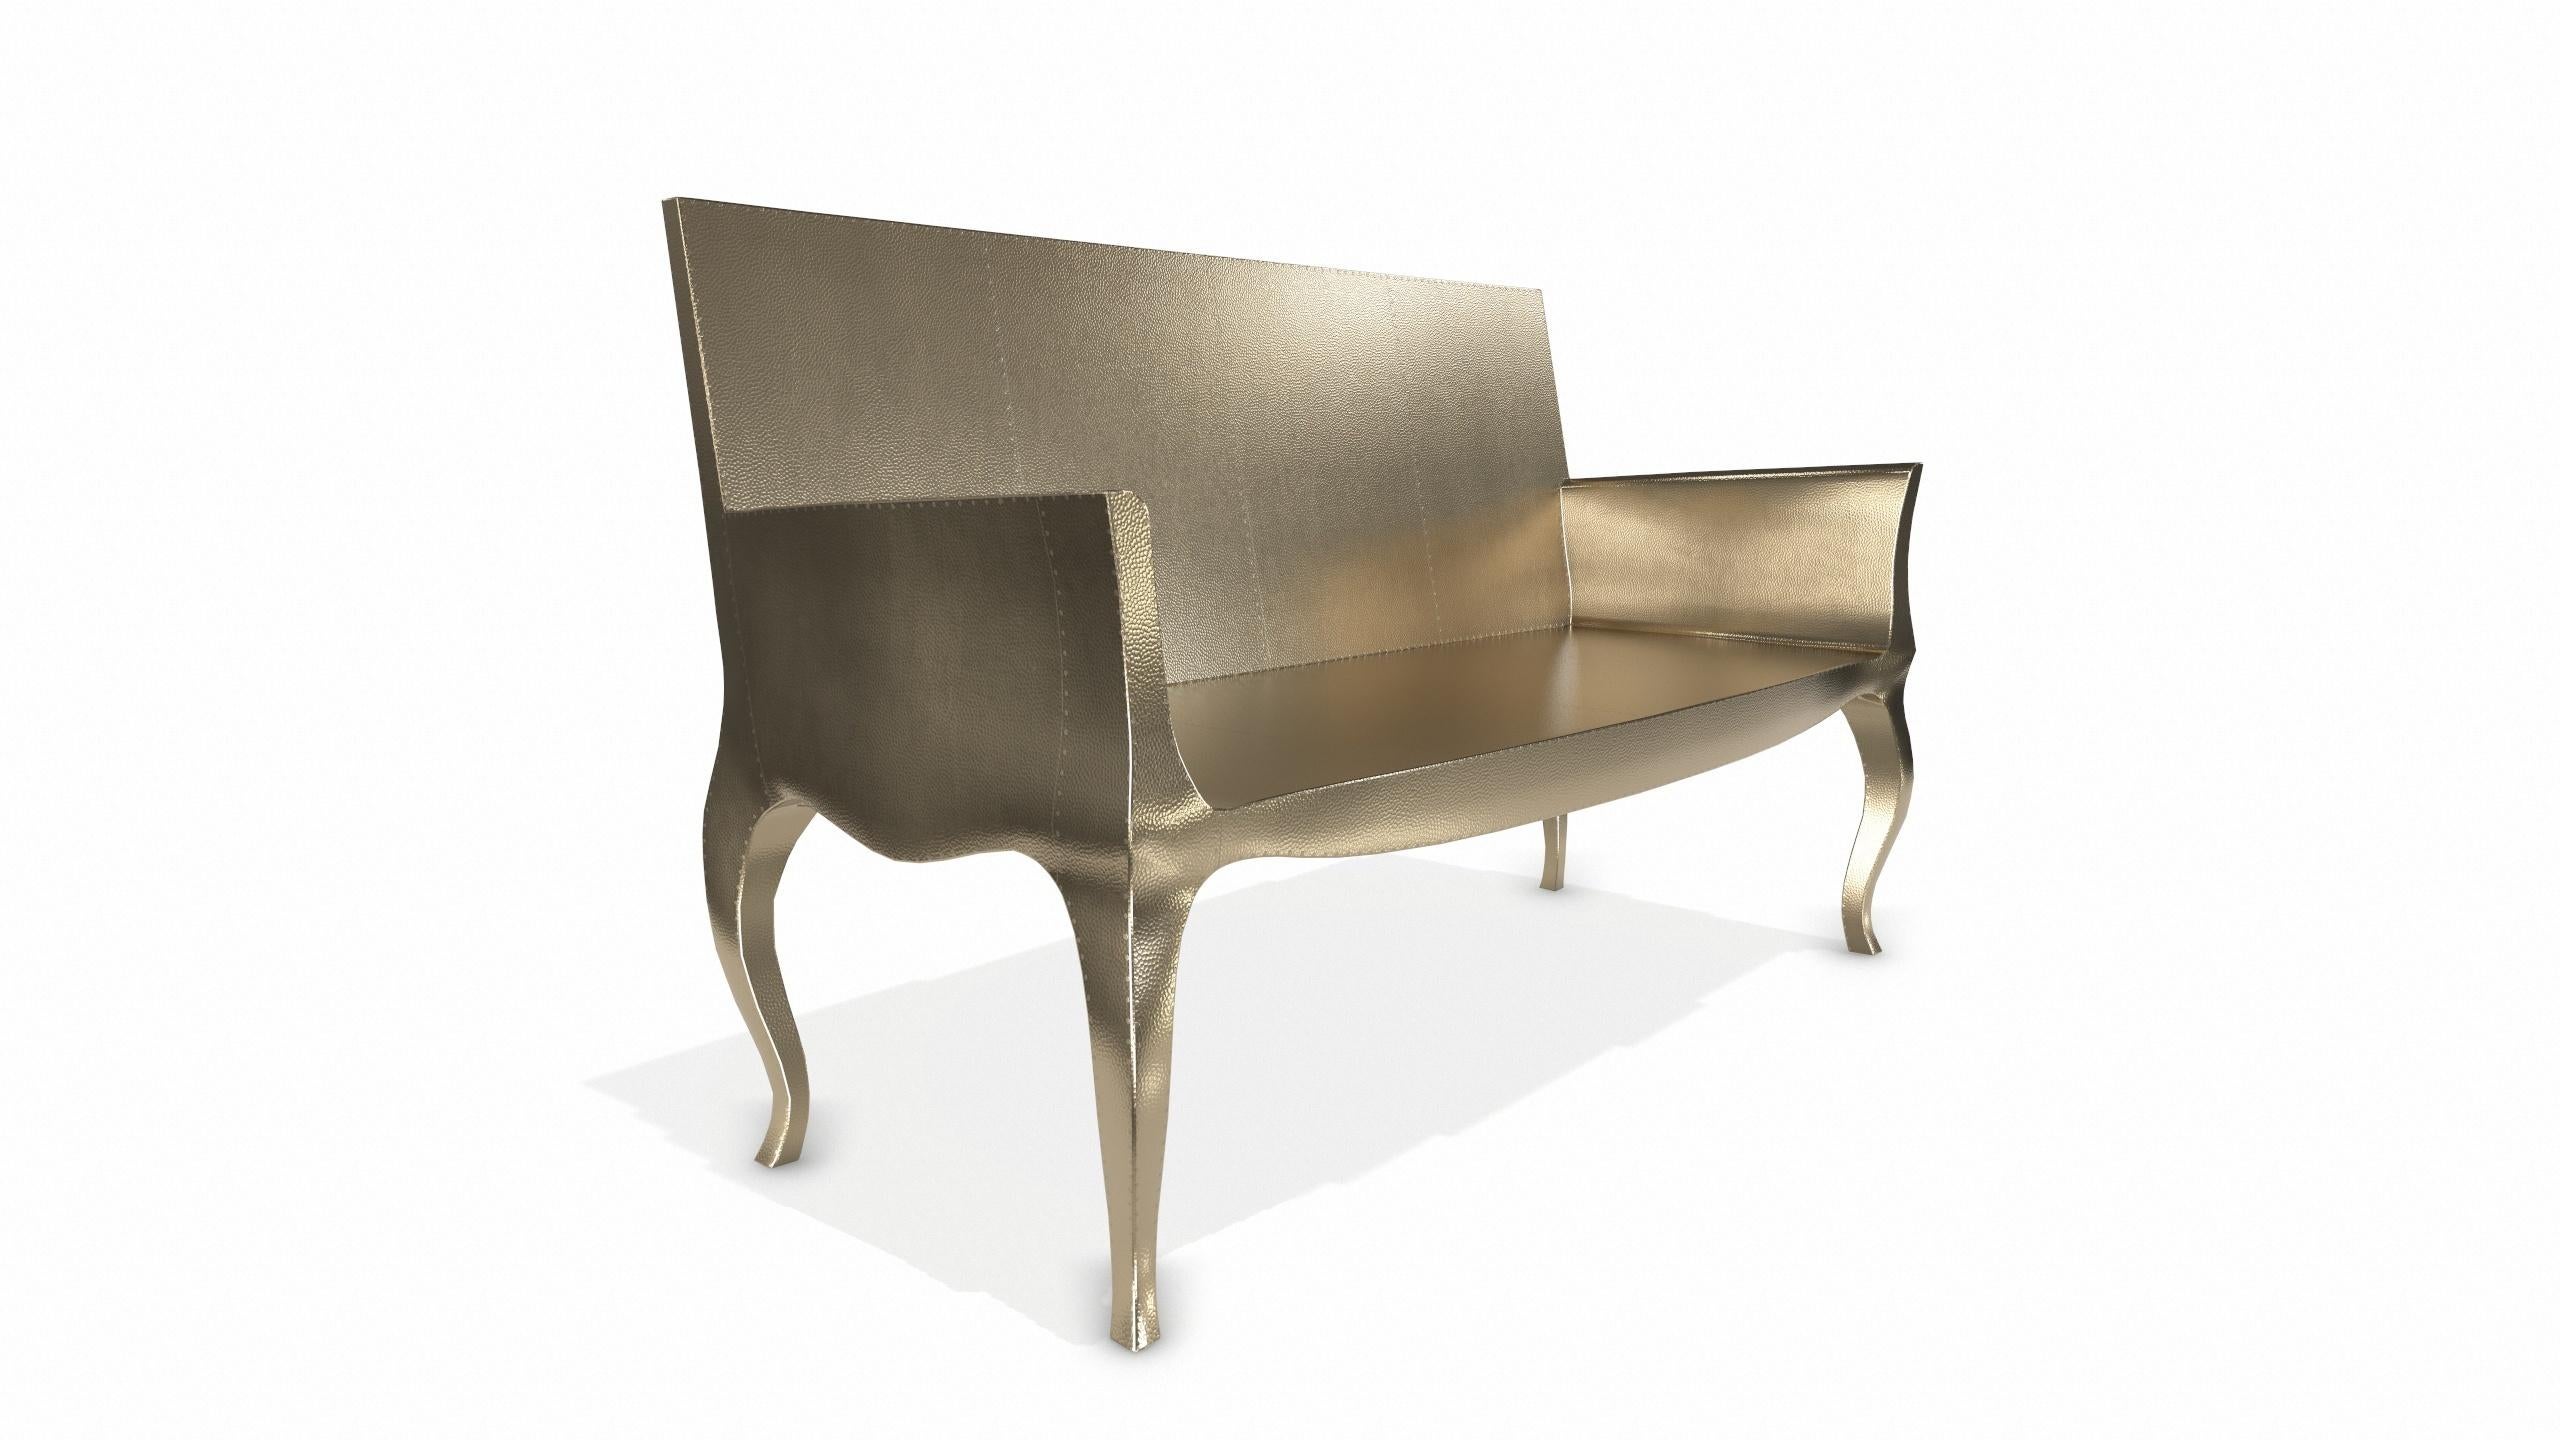 Louise Settee Art Deco Benches in Mid. Hammered Brass by Paul Mathieu In New Condition For Sale In New York, NY